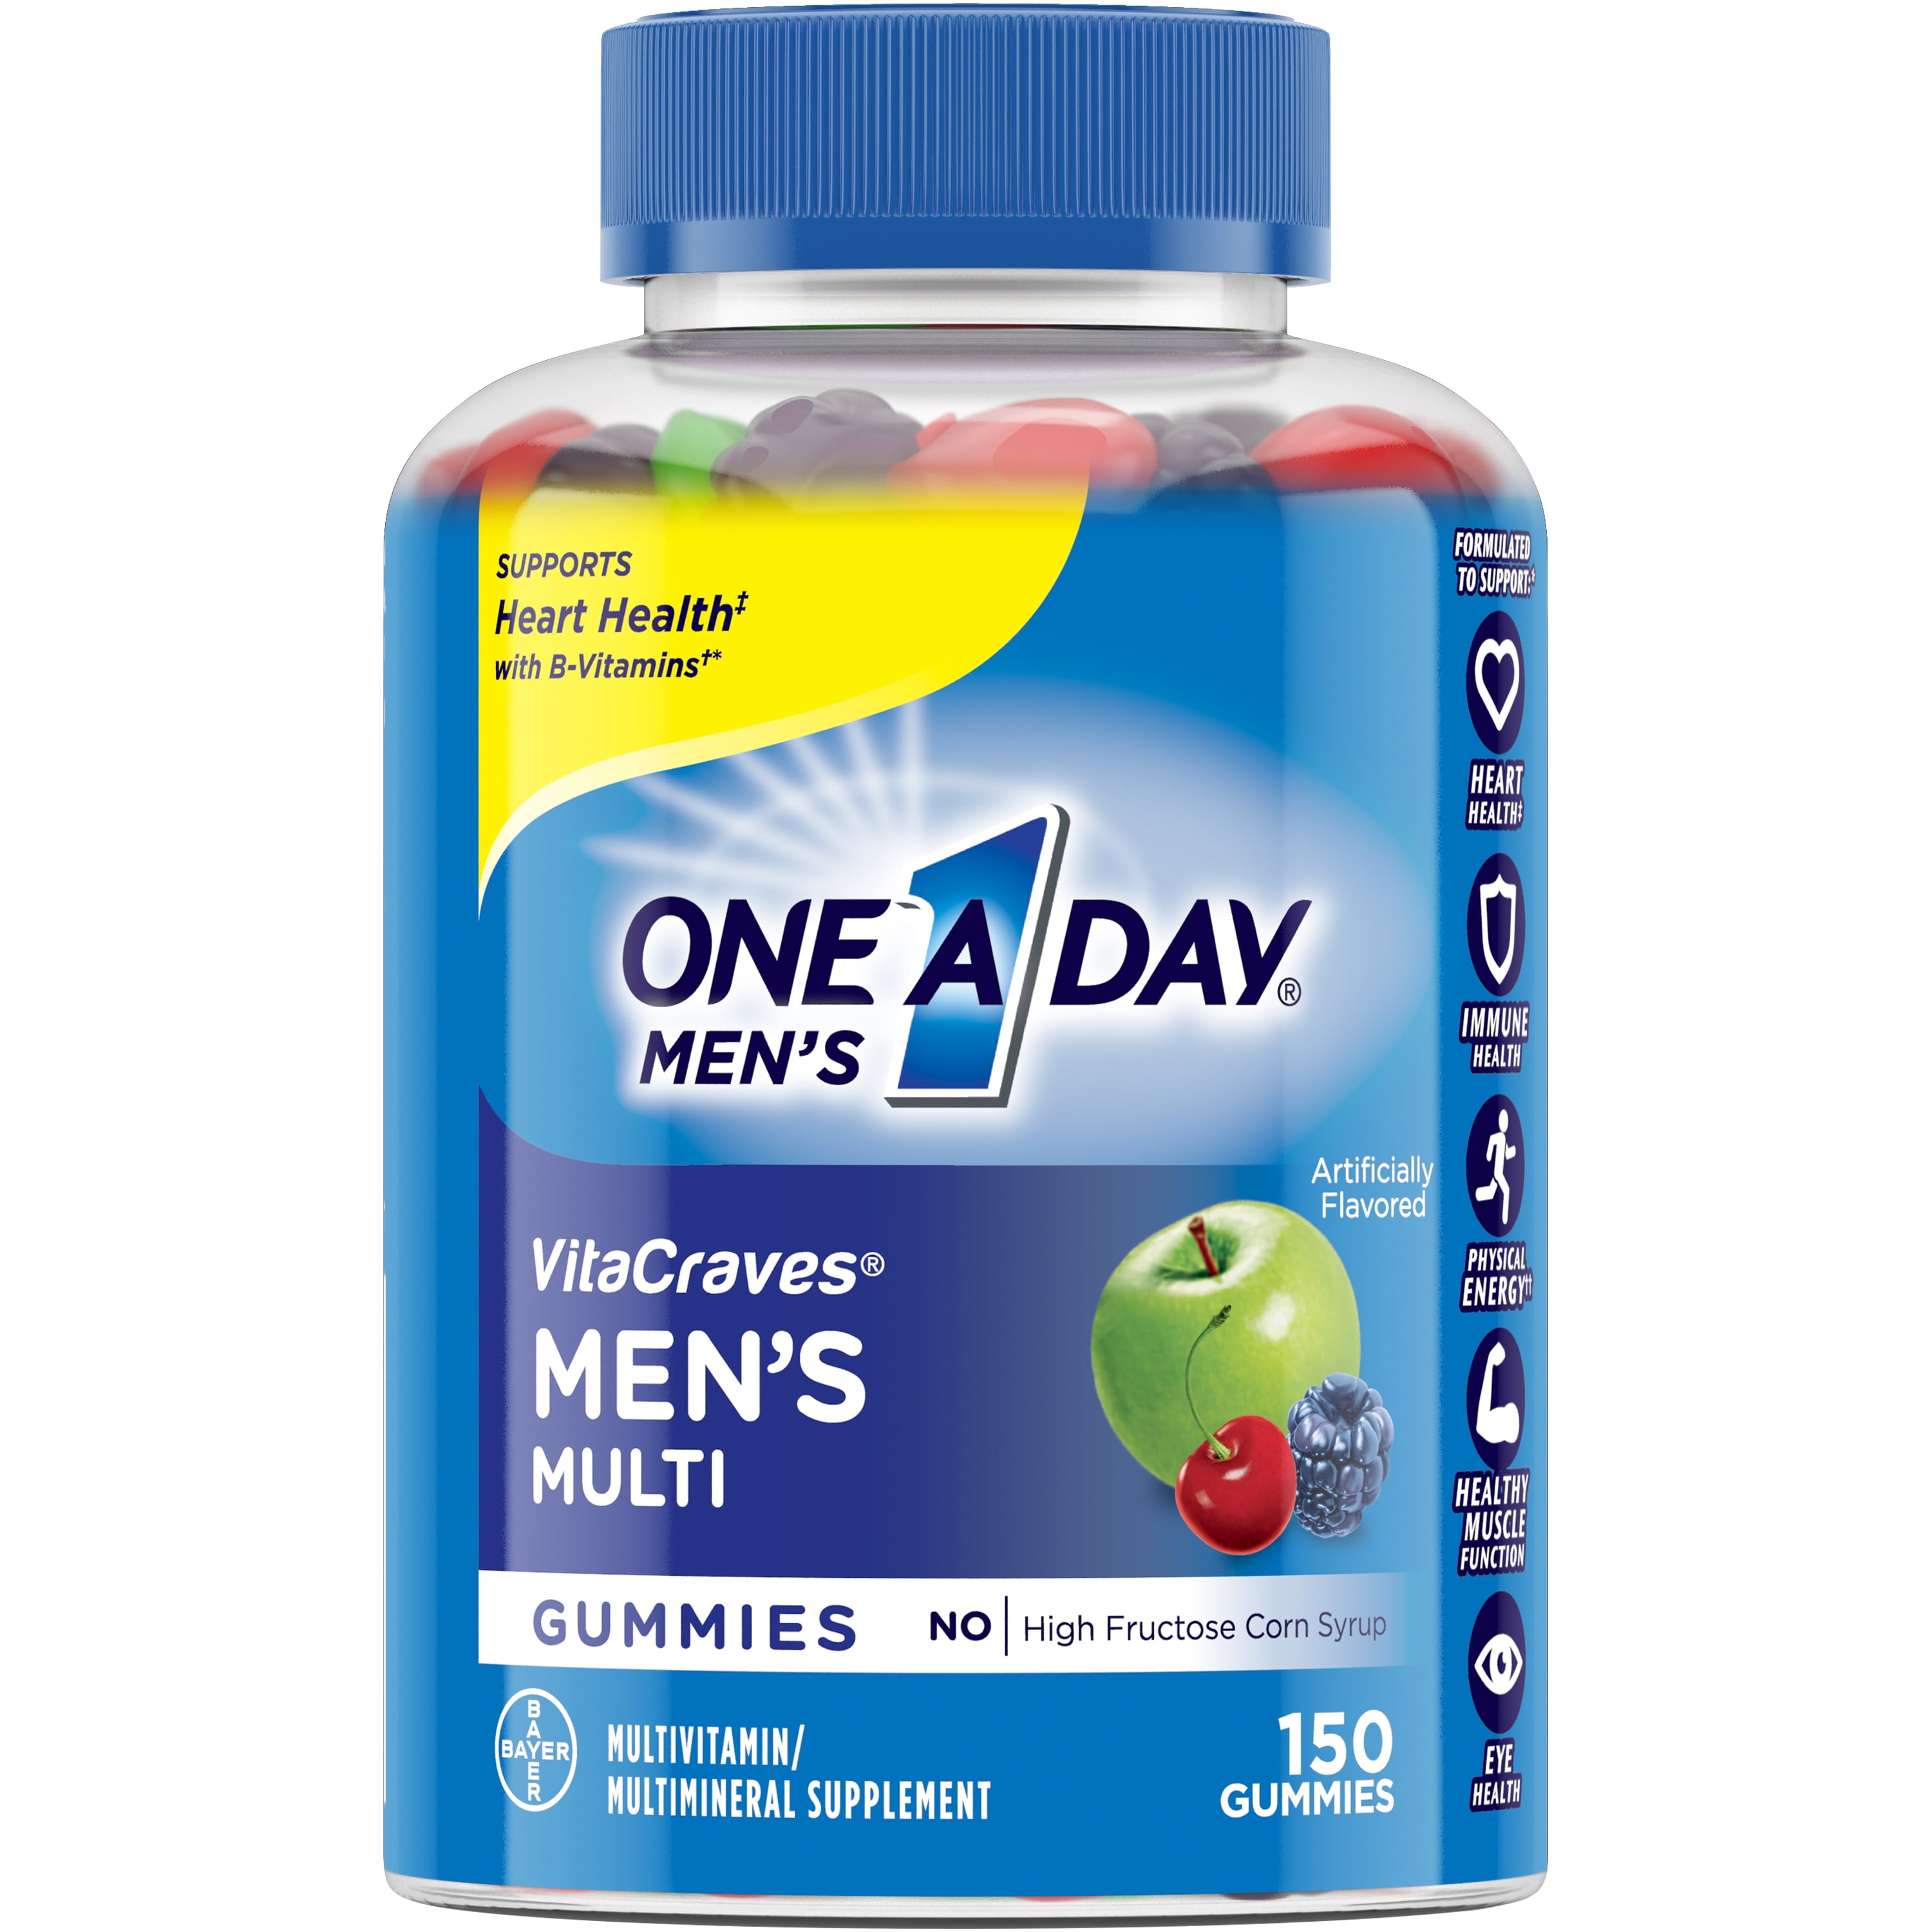 One A Day Men's VitaCraves Multivitamin Supplement with Vitamins A, C, B6, B12, and Vitamin D, 150 ct. Walmart.com